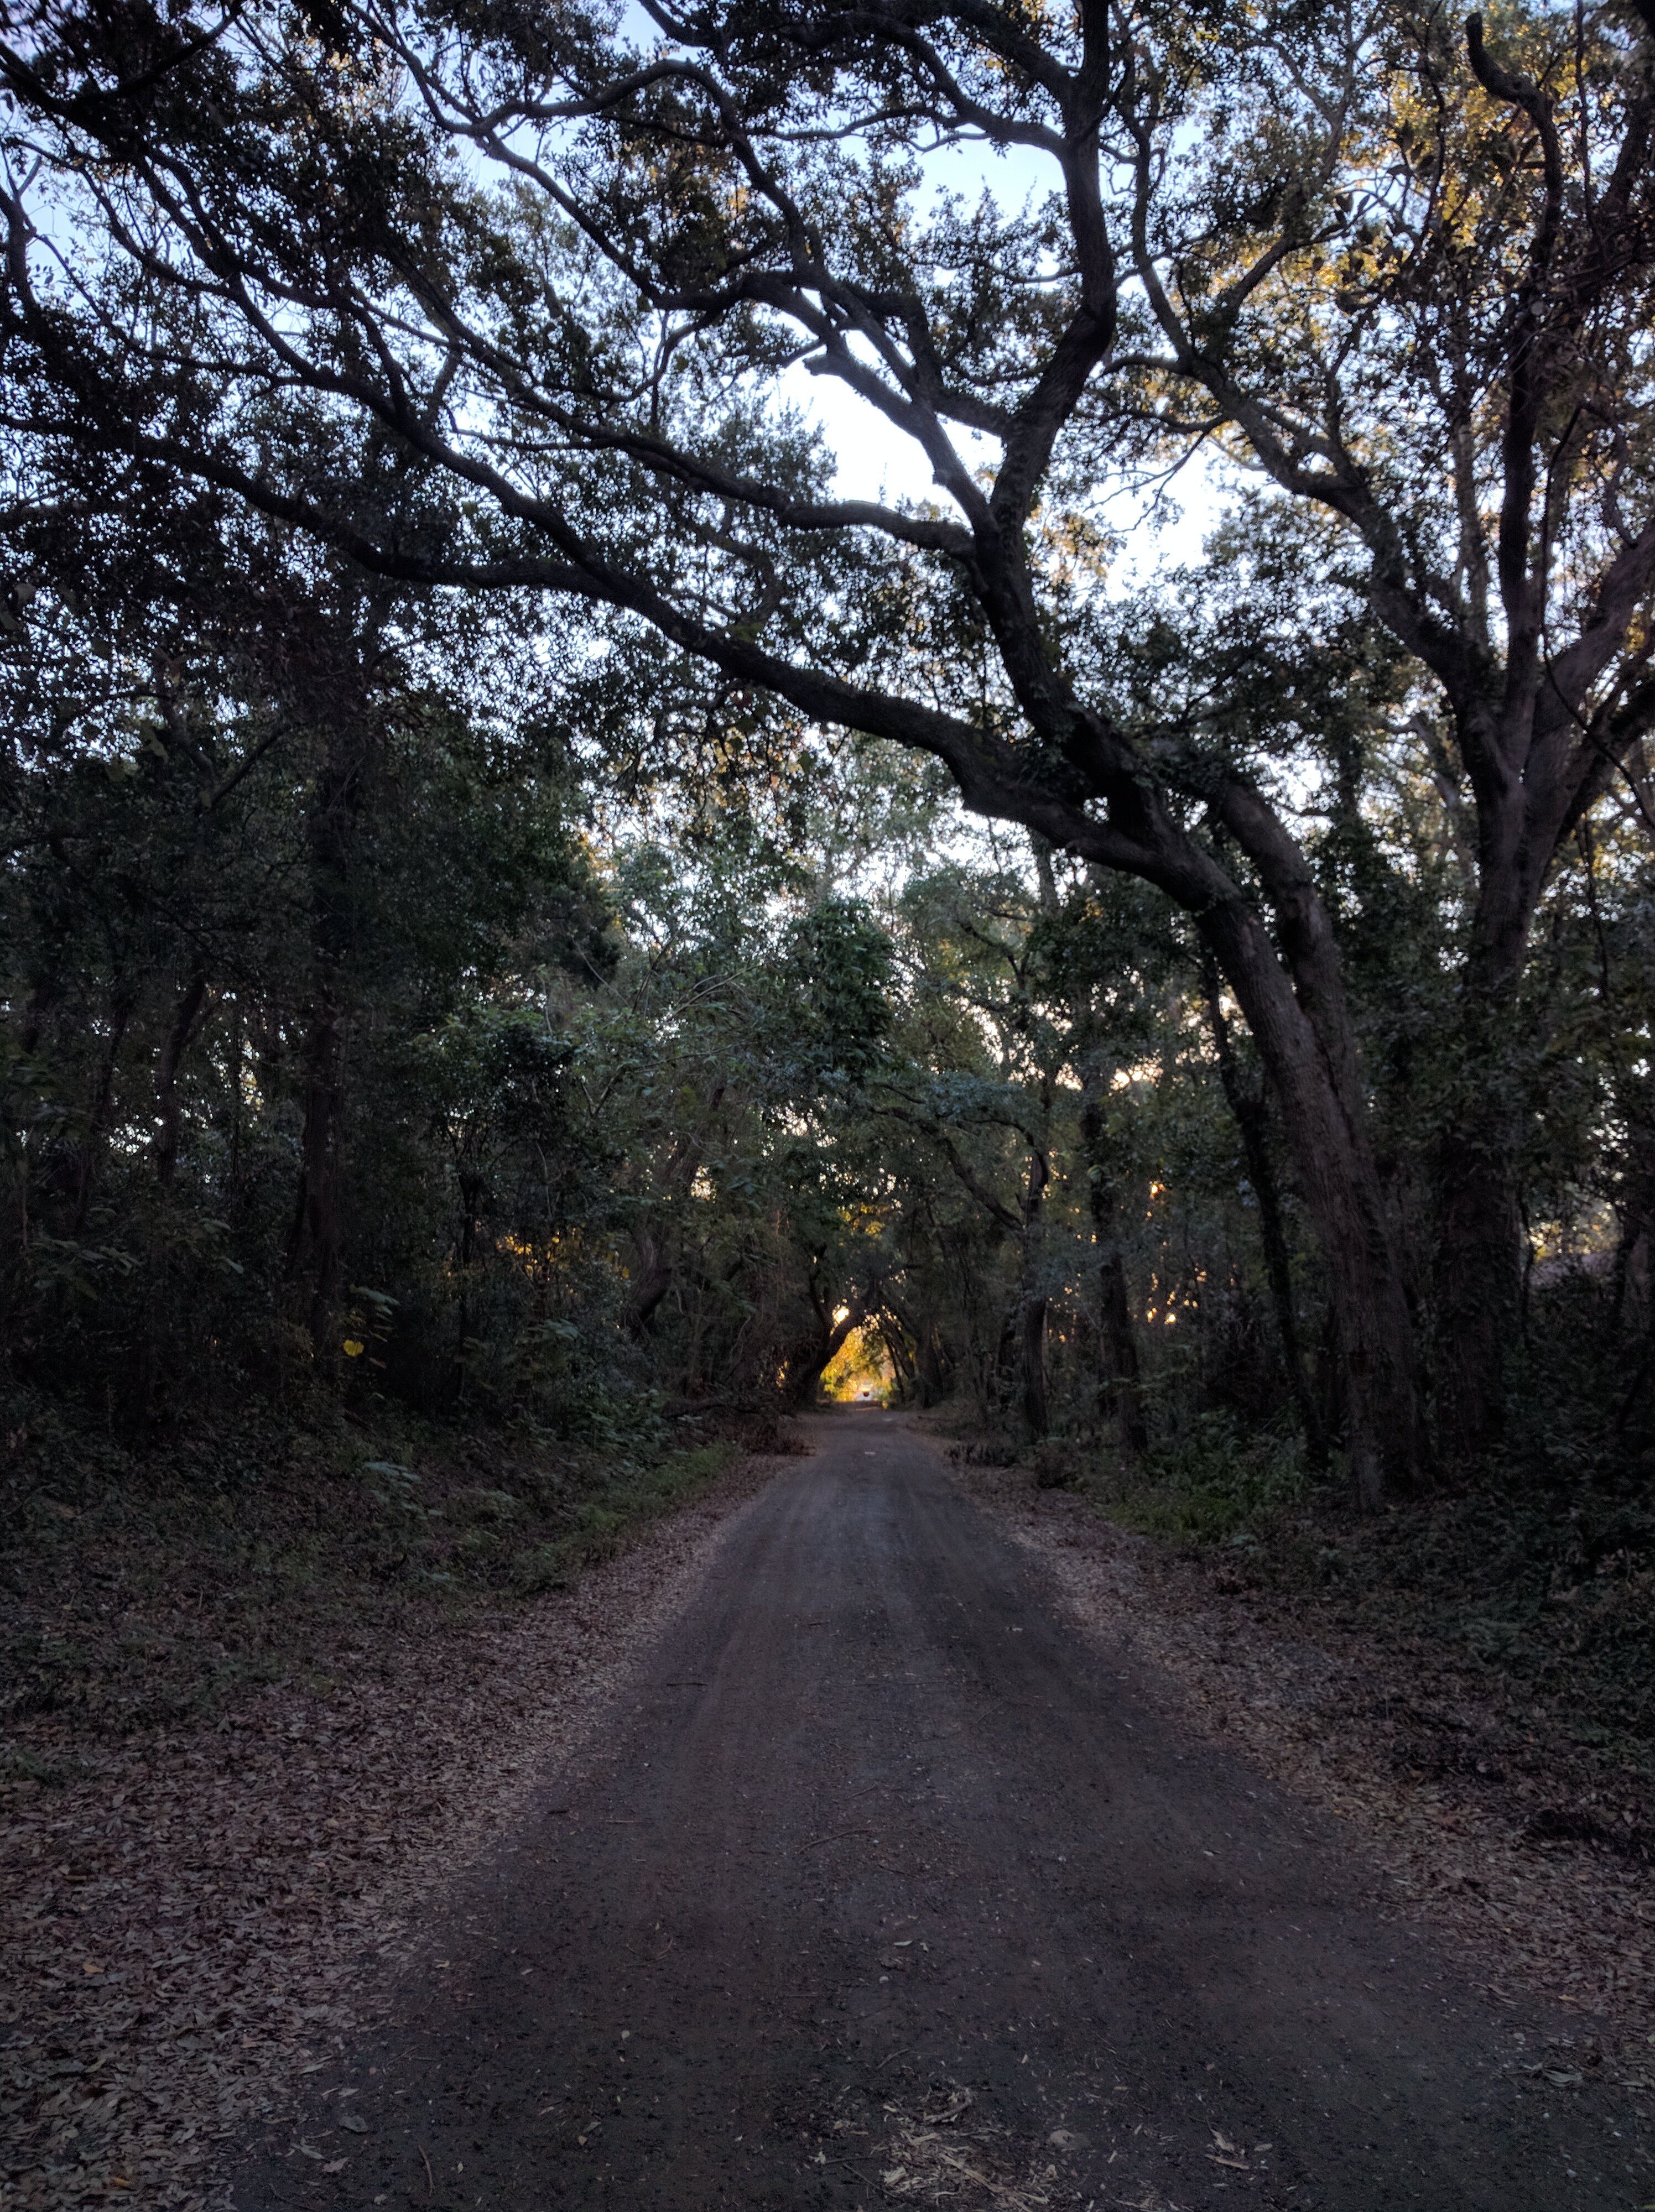 This was from my run on Sunday on the island, though this wasn't in Fort Clinch. Add more tree canopy, and substitute pavement for that dirt road, and you'll get the idea of what it was like to run in FC.